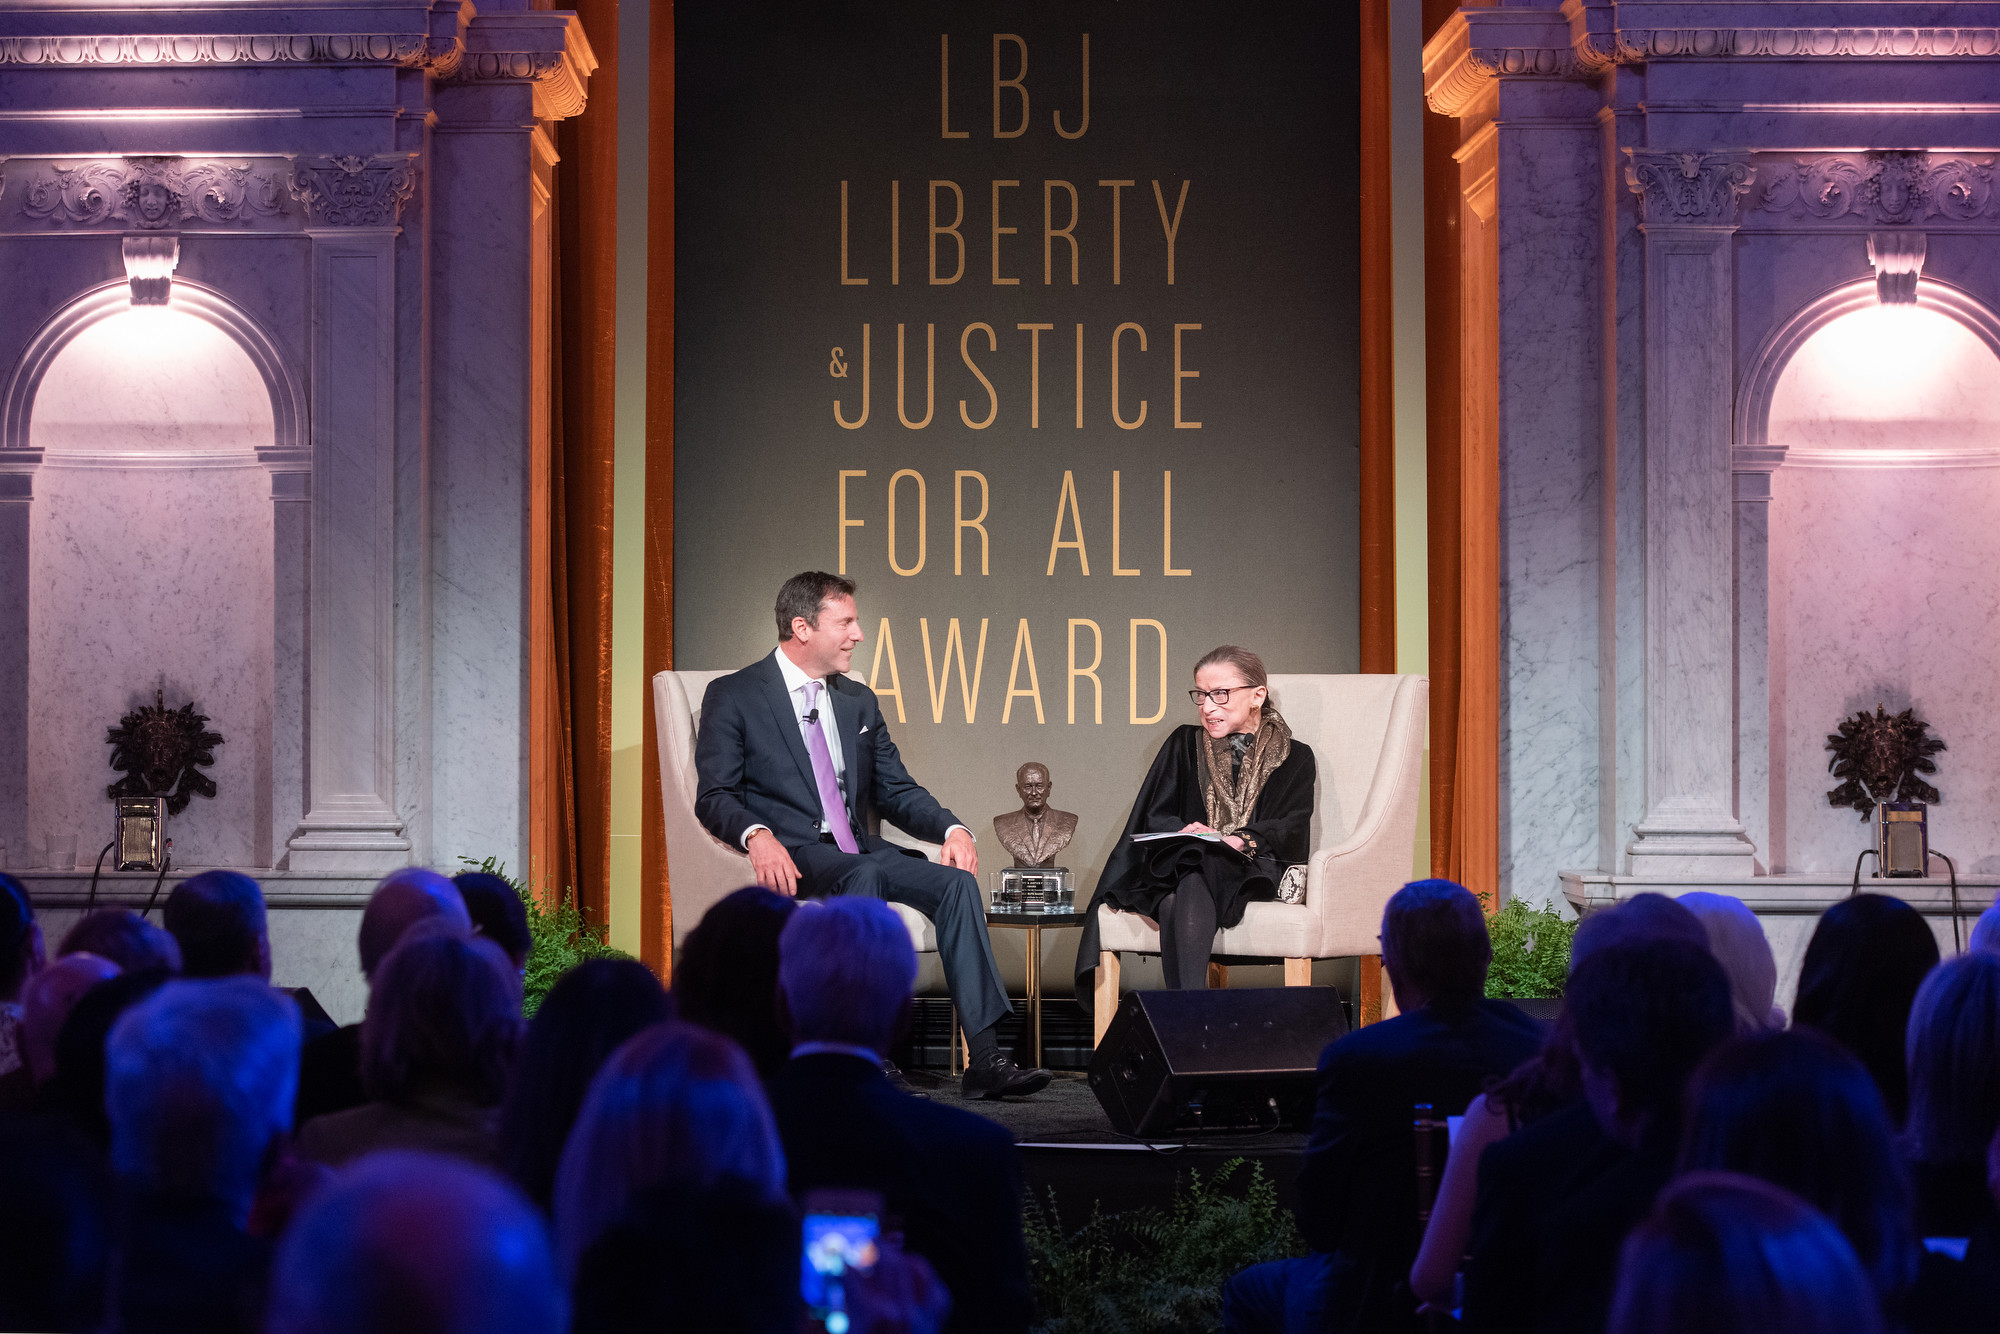 U.S. Supreme Court Justice Ruth Bader Ginsburg and LBJ Foundation President and CEO Mark K. Updegrove discuss the justice’s trailblazing career at the Library of Congress in Washington, D.C. LBJ Foundation photo by Daniel Swartz.